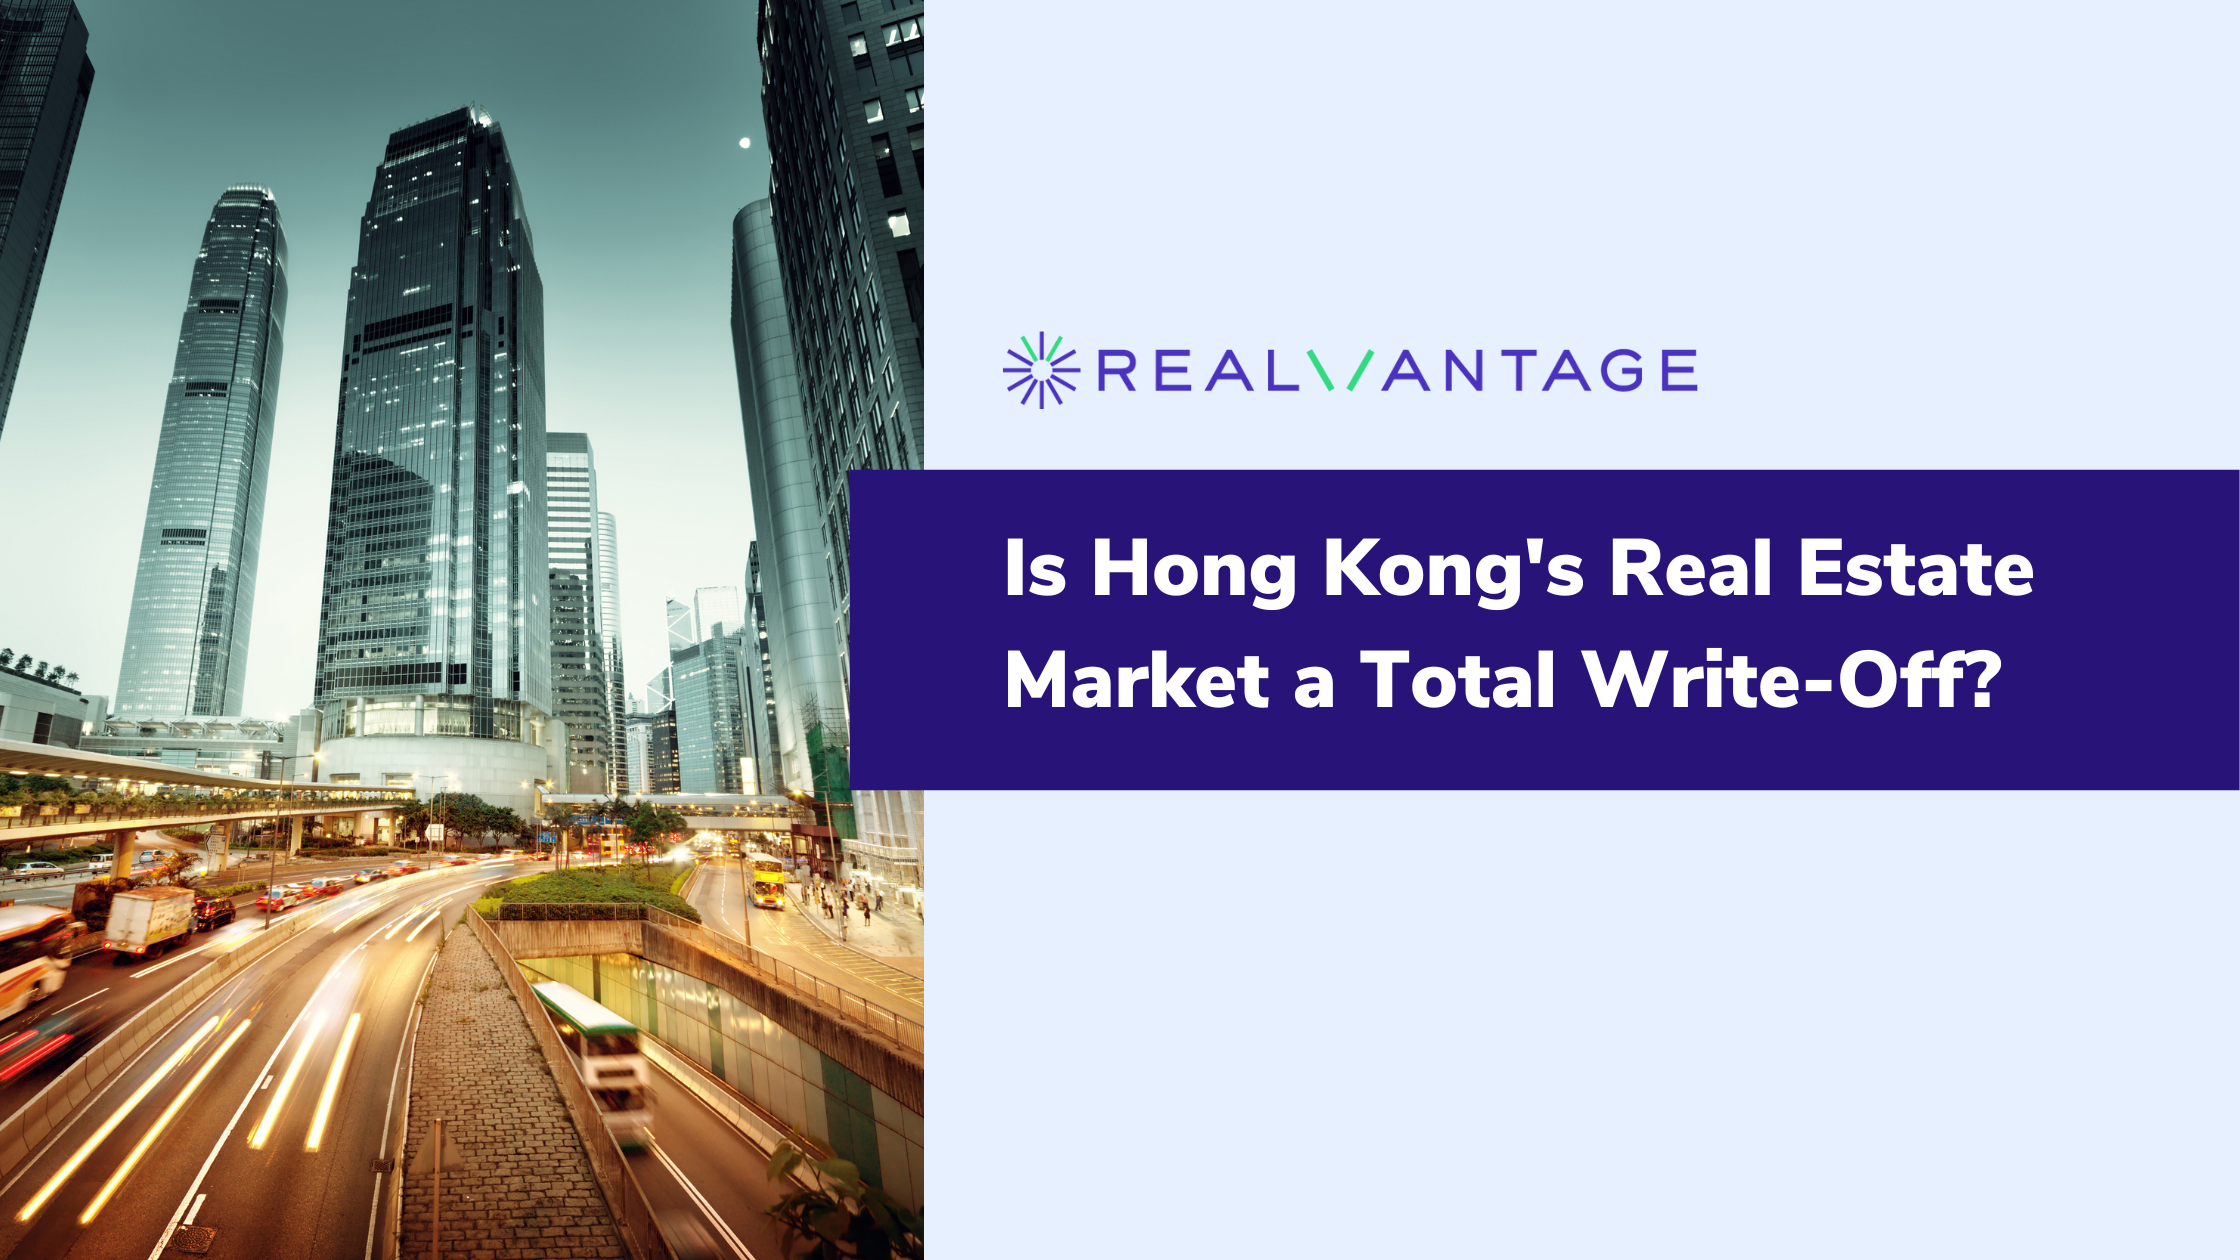 Is Hong Kong’s Real Estate Market a Total Write-Off?